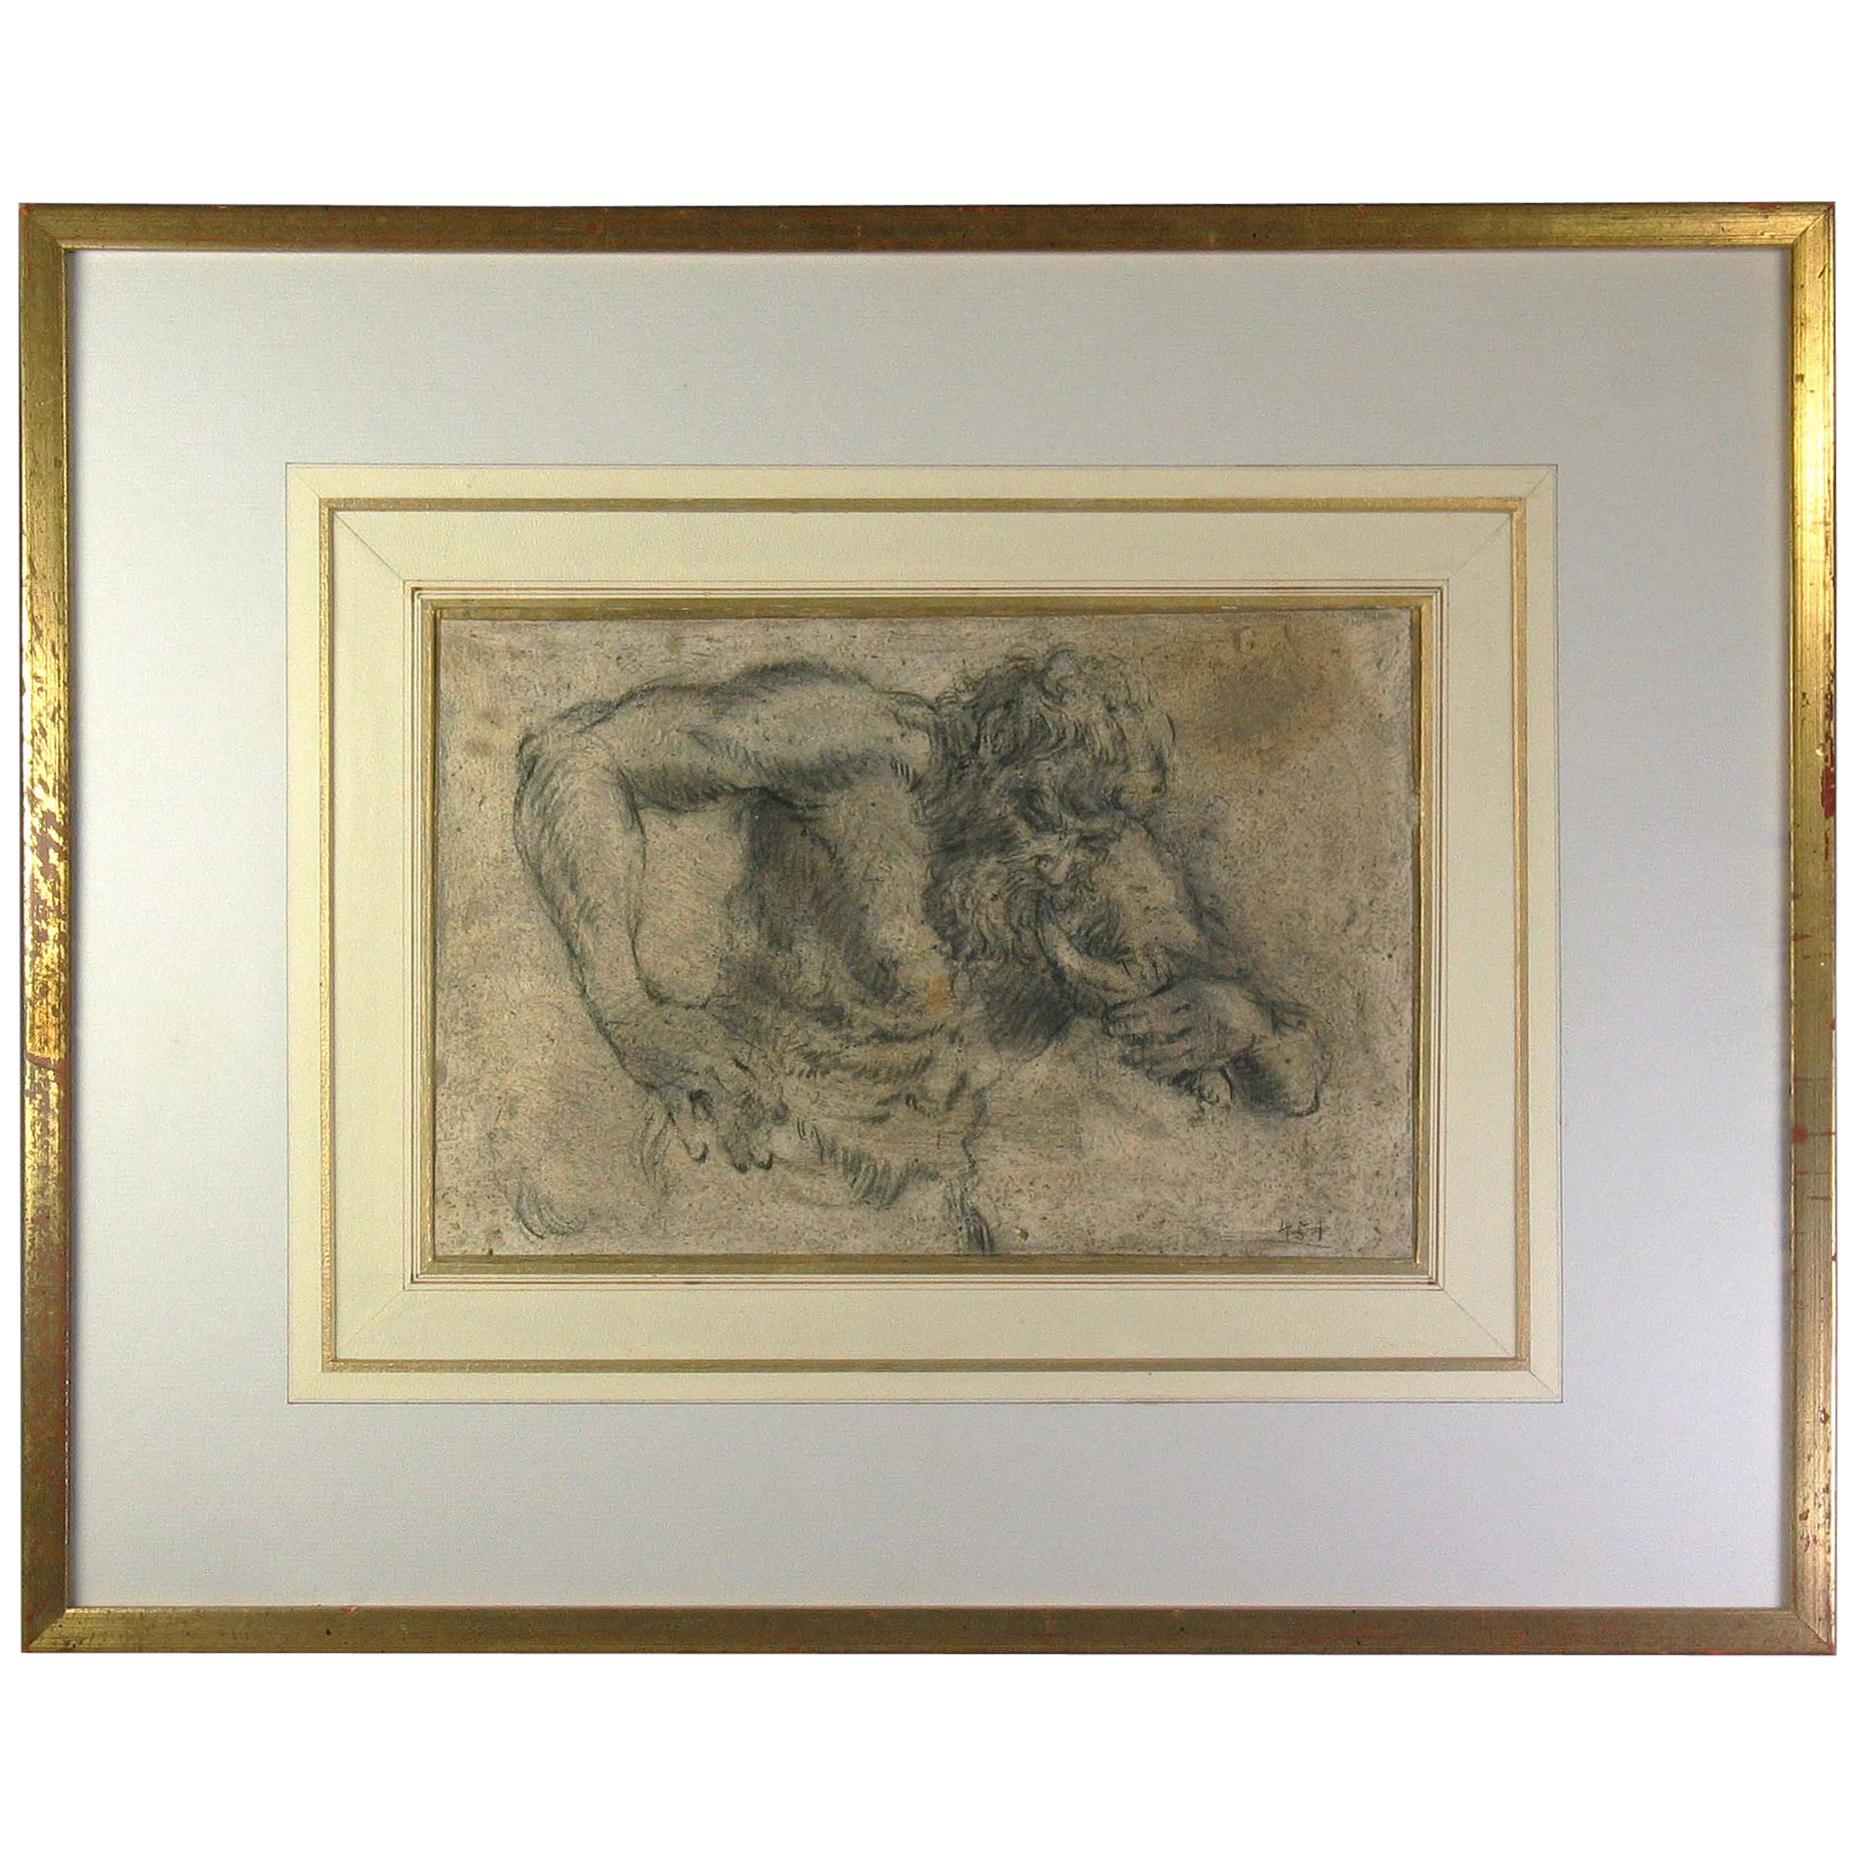 Old Master Drawing Manner of Sir Peter Paul Rubens, 18th Century or Earlier